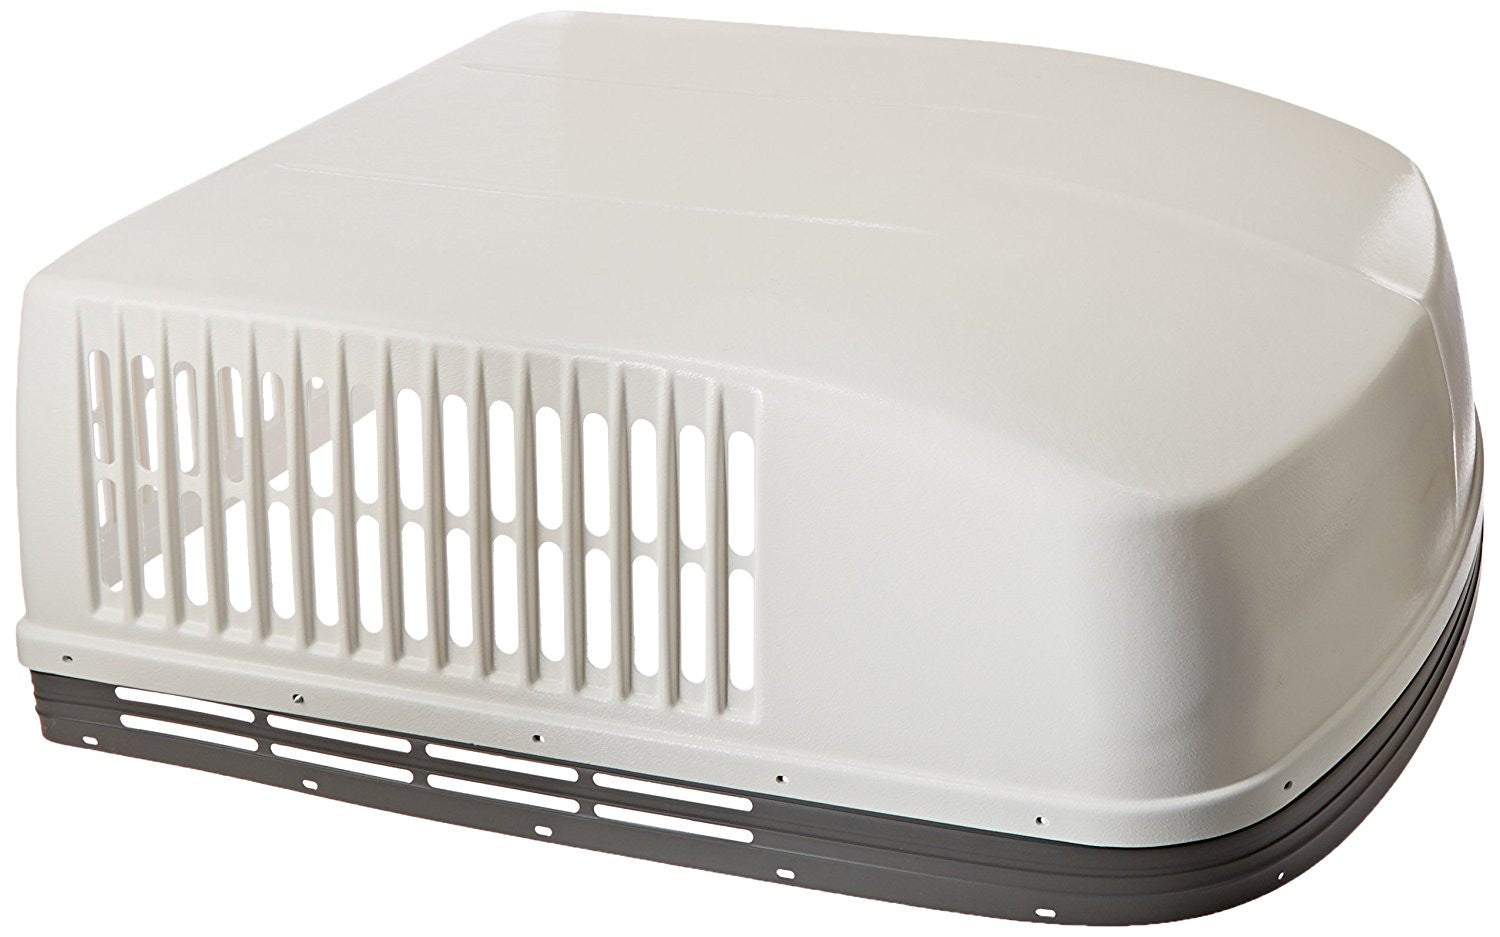 duo therm brisk air rv air conditioner